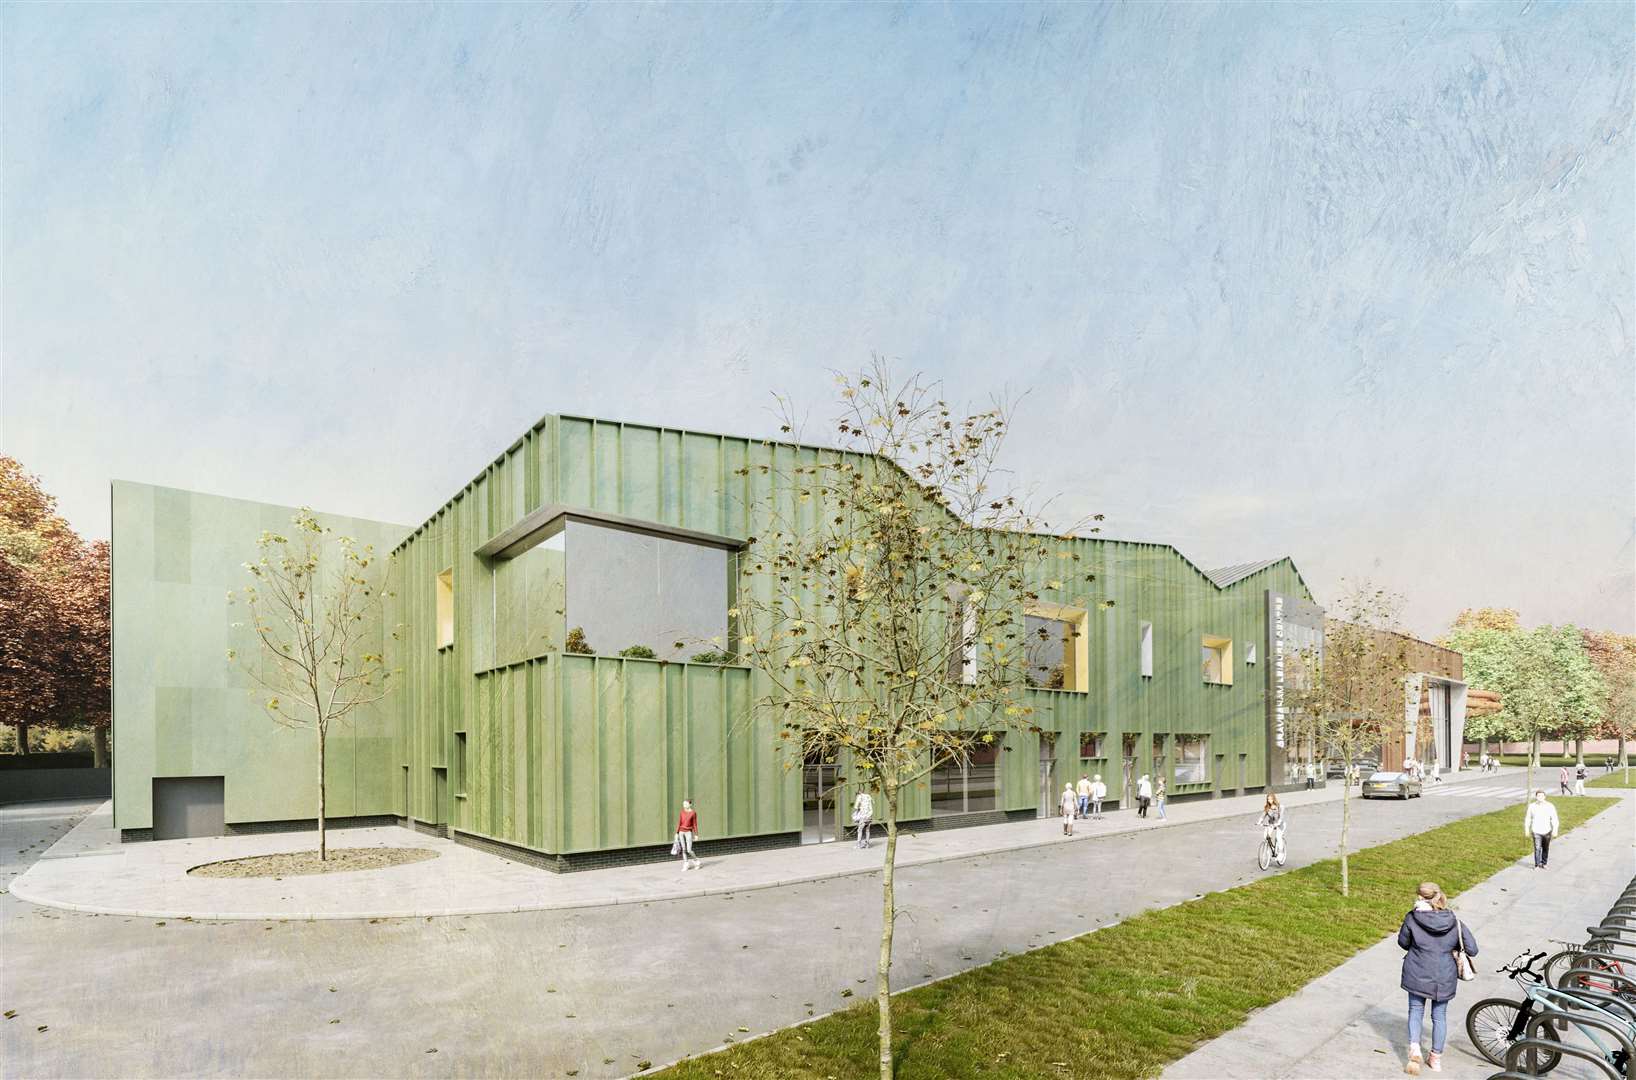 What the community, fitness suite and sports hall could look like from the outside. Picture: Gravesham Borough Council